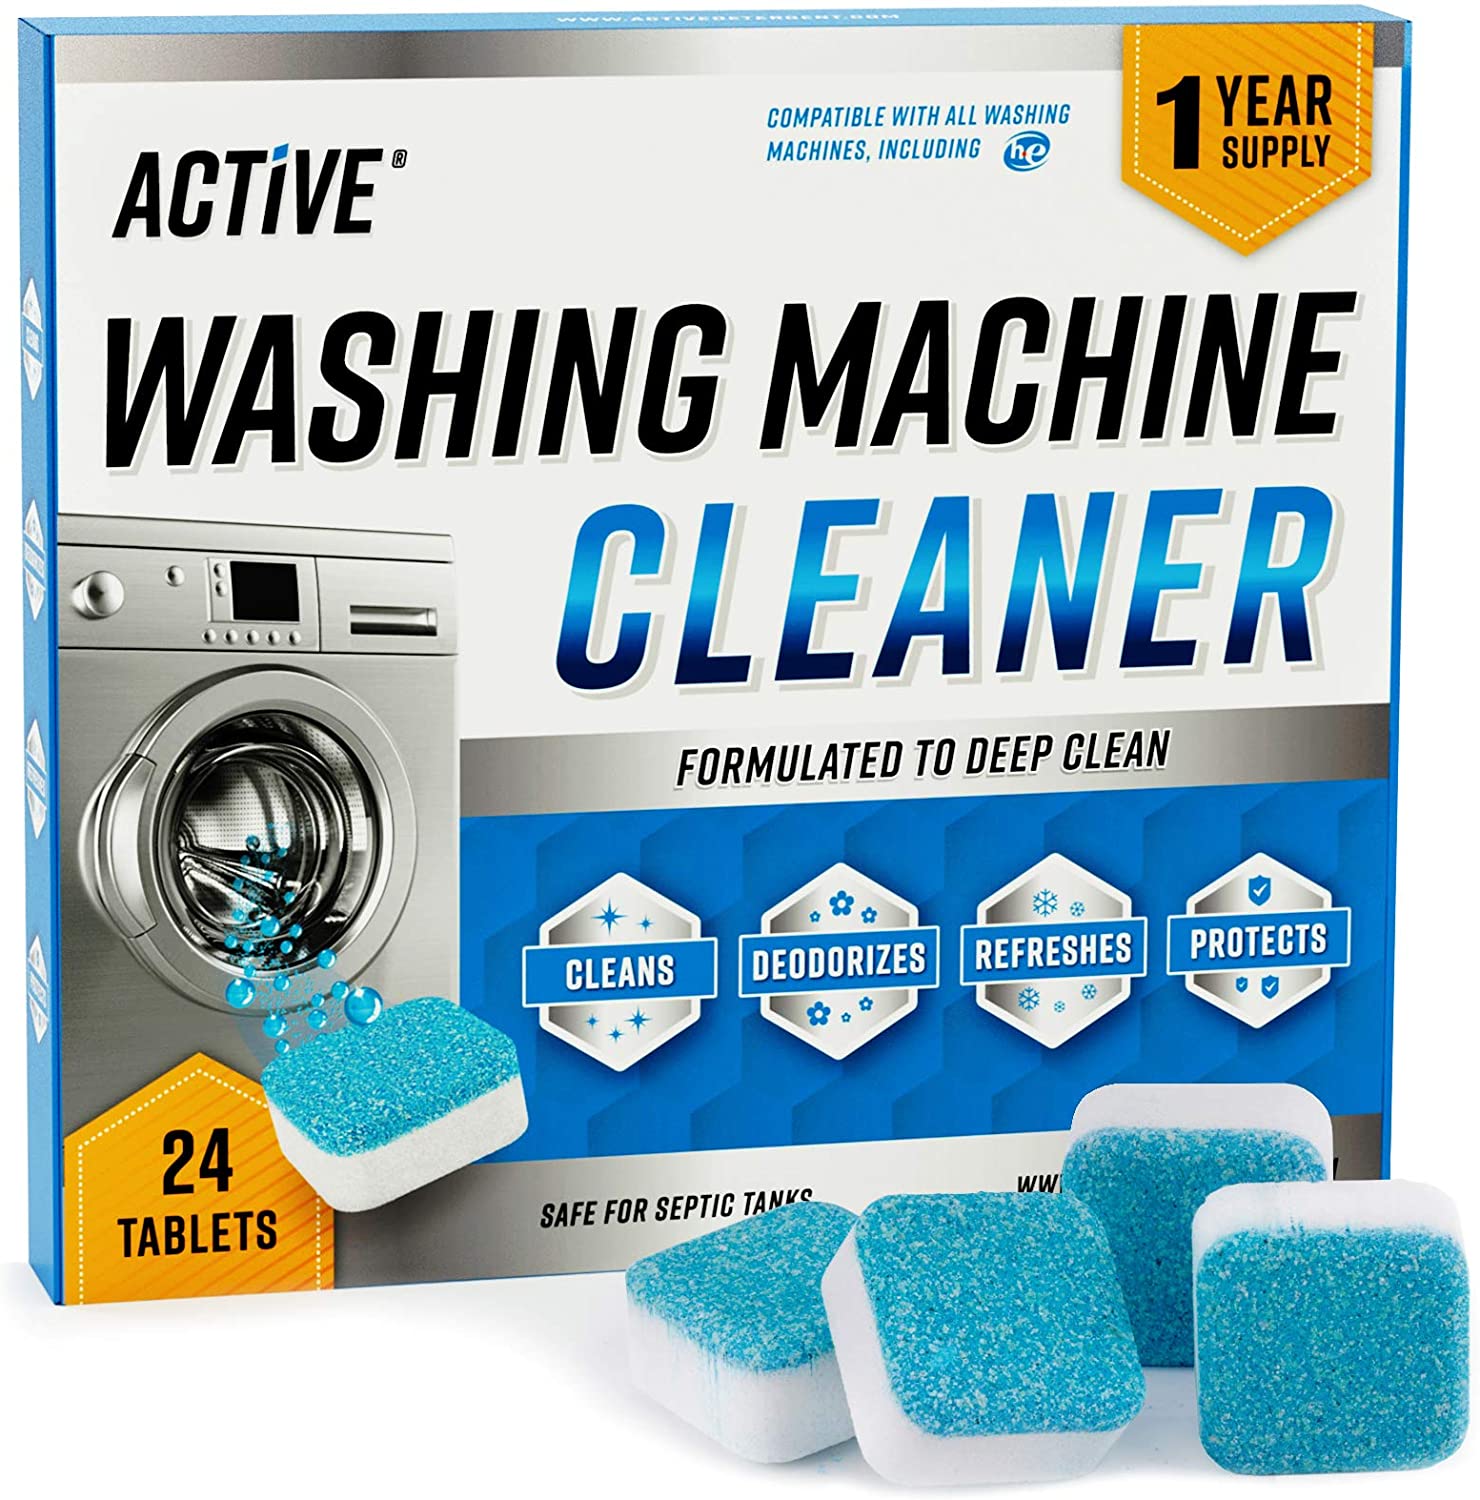 ACTIVE Eco-Friendly Washing Machine Cleaner, 24-Pack